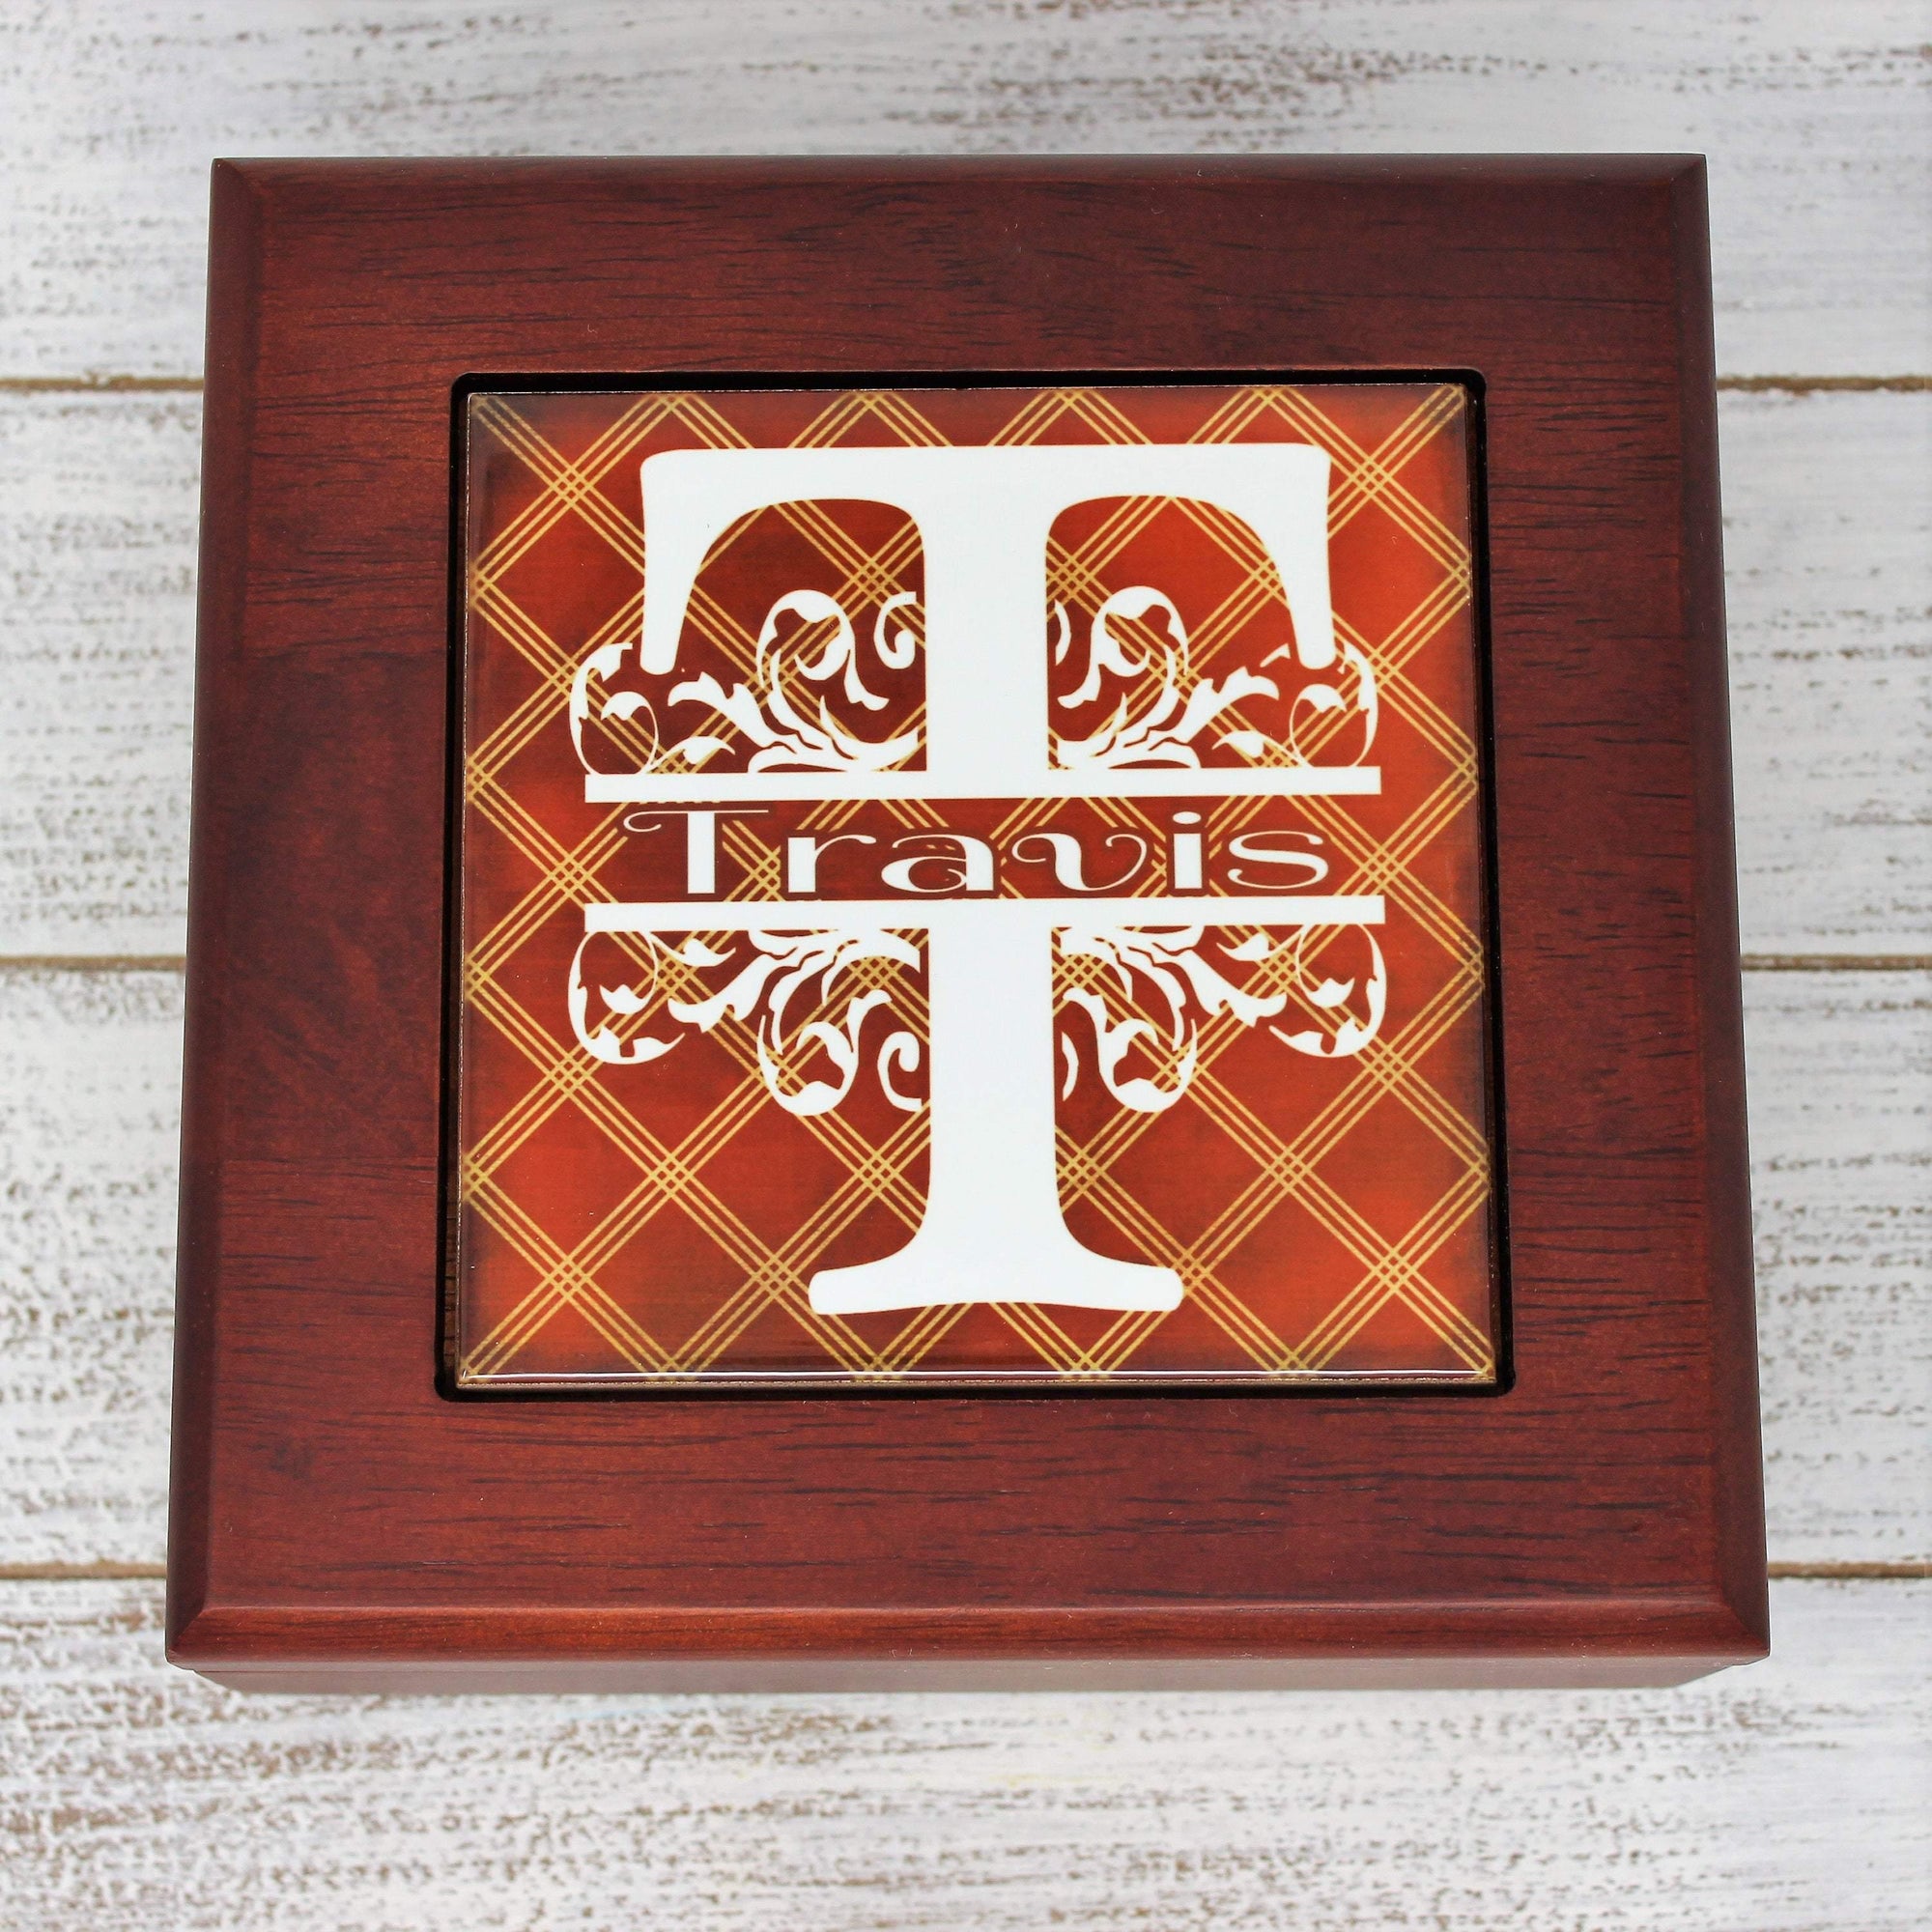 Personalized Mahogany Finished Box w/Hinge Lid | Brown Argyle - This & That Solutions - Personalized Mahogany Finished Box w/Hinge Lid | Brown Argyle - Personalized Gifts & Custom Home Decor